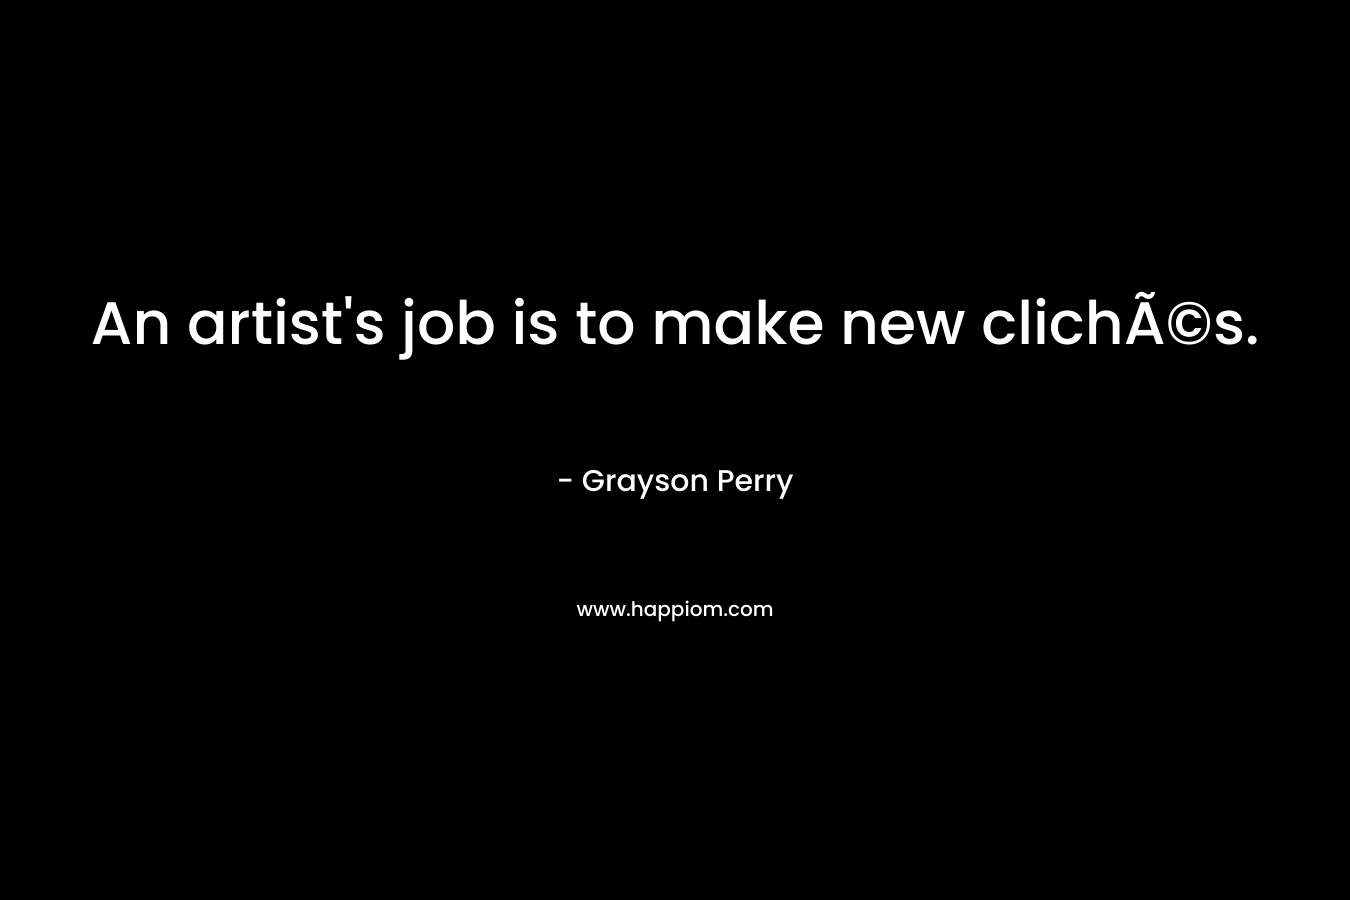 An artist’s job is to make new clichÃ©s. – Grayson Perry